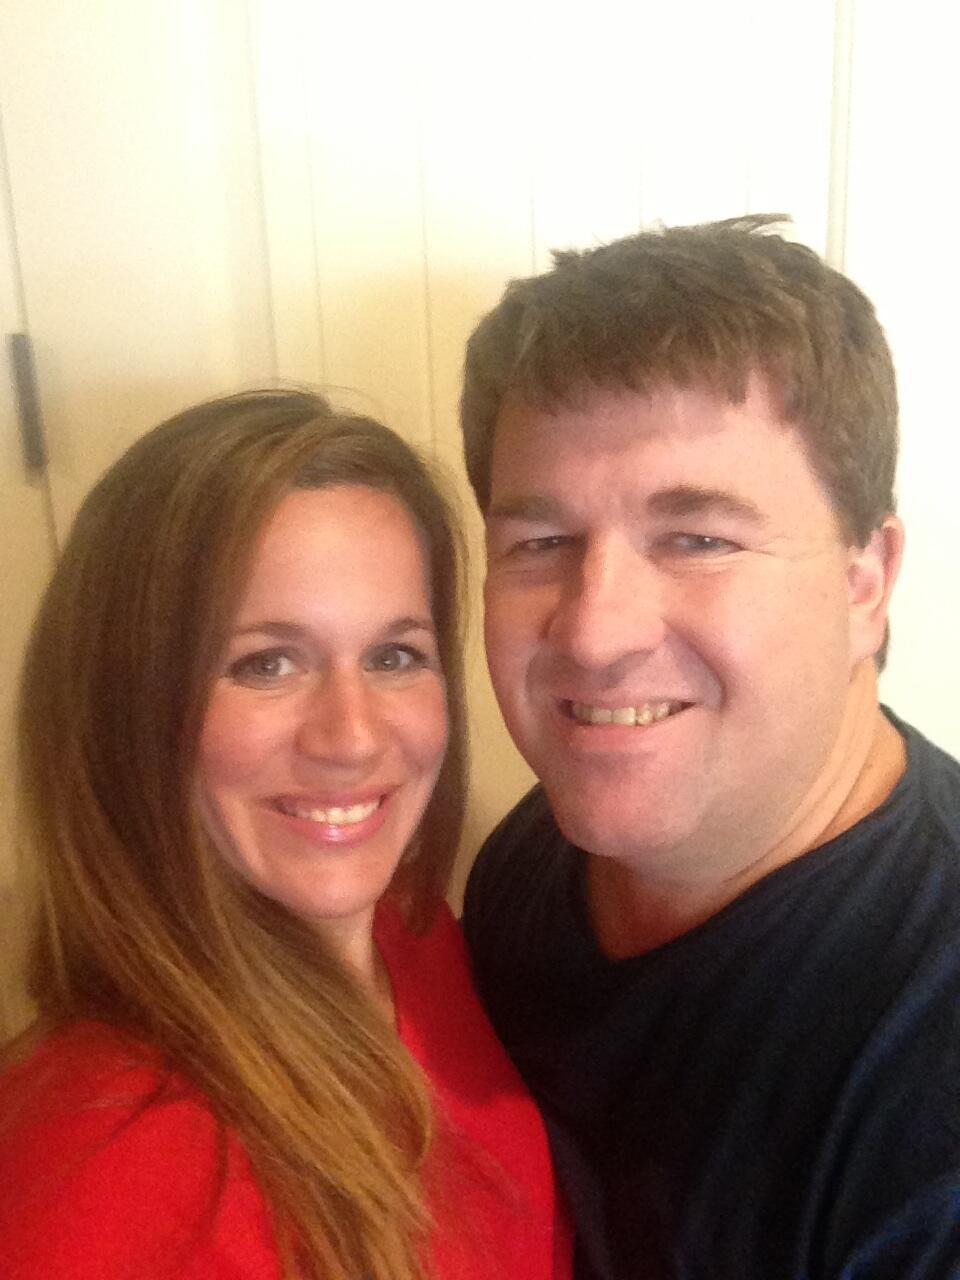 Chris Moneymaker on Twitter: "Best wife ever http://t.co/mppQuboo0a"